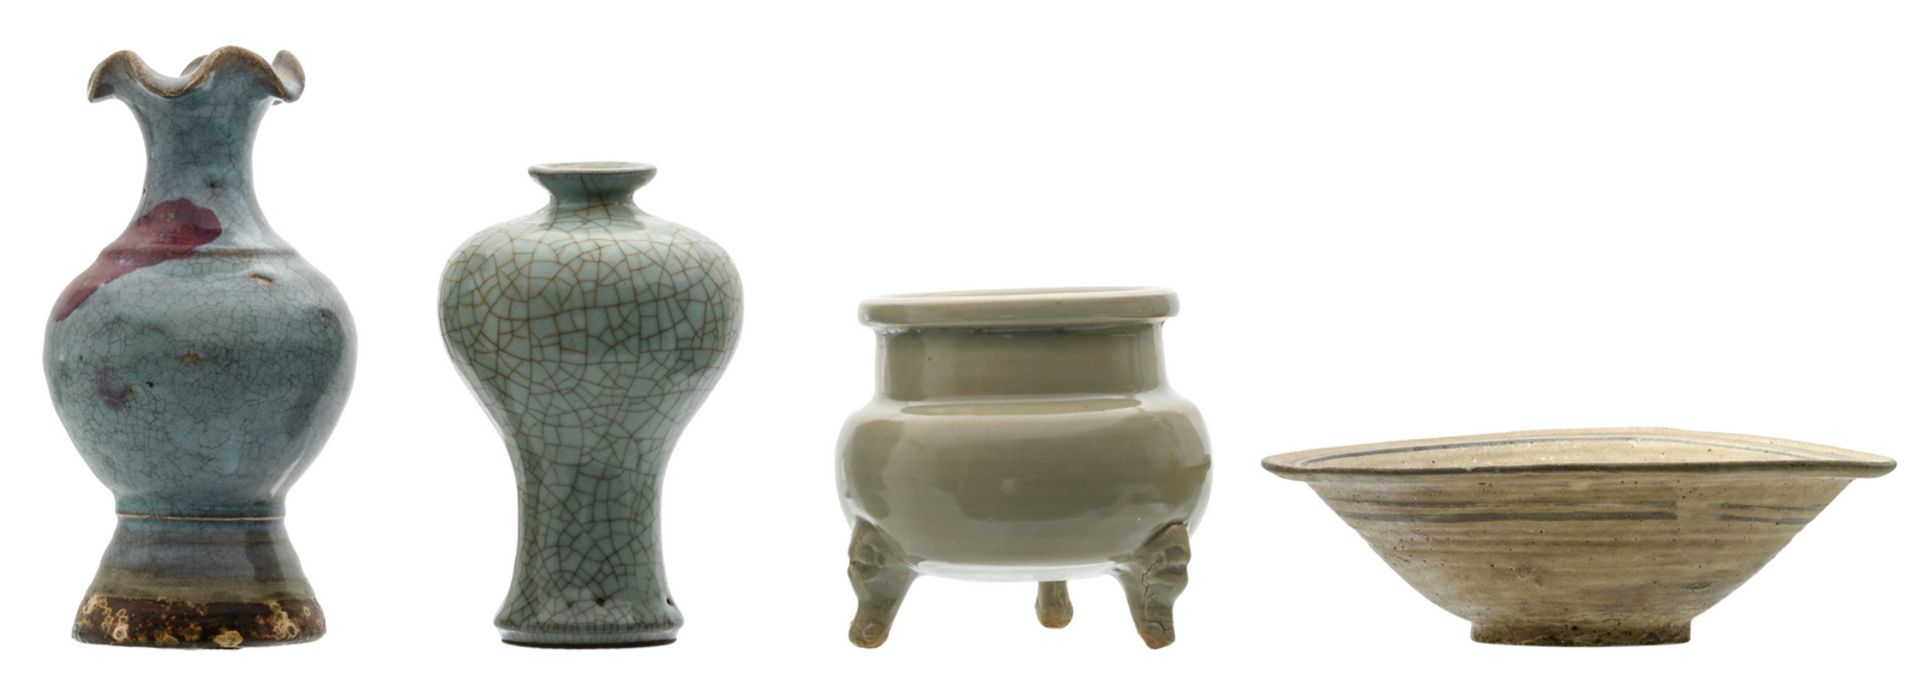 Two Chinese vases and a tripod incense burner in the jun ware manner, crackleware and celadon; added